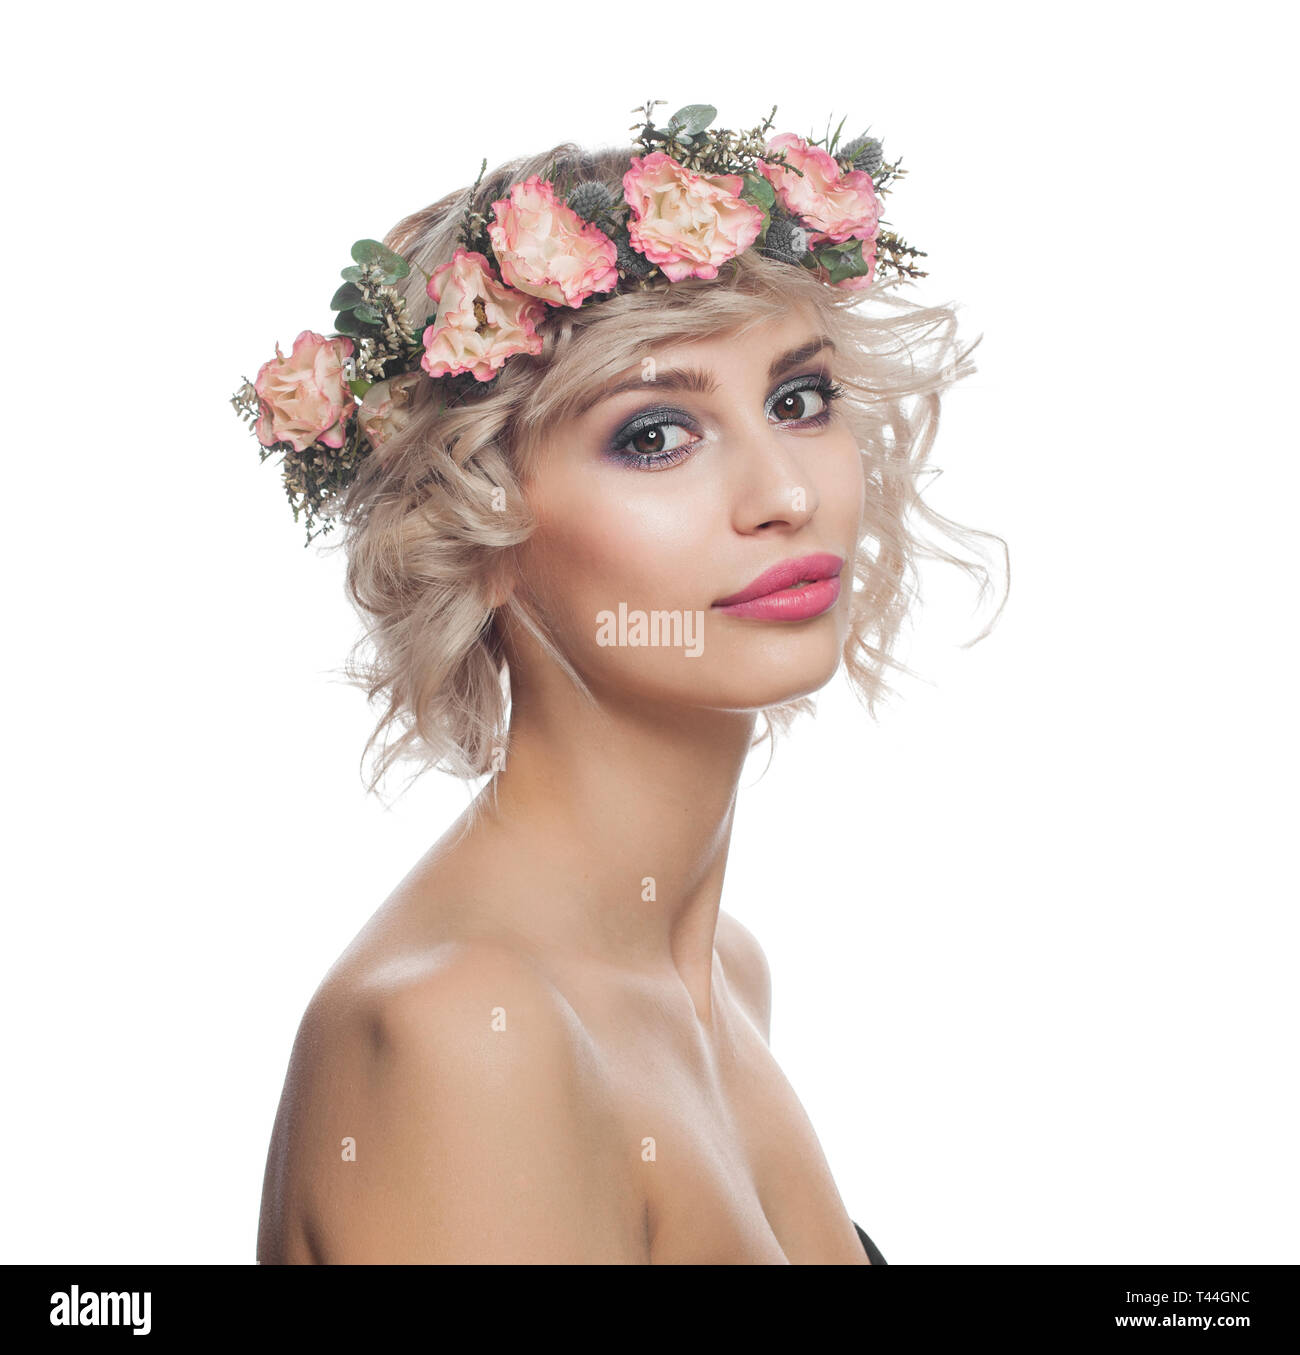 Beautiful Blonde Woman With Short Curly Hair Makeup And Flowers